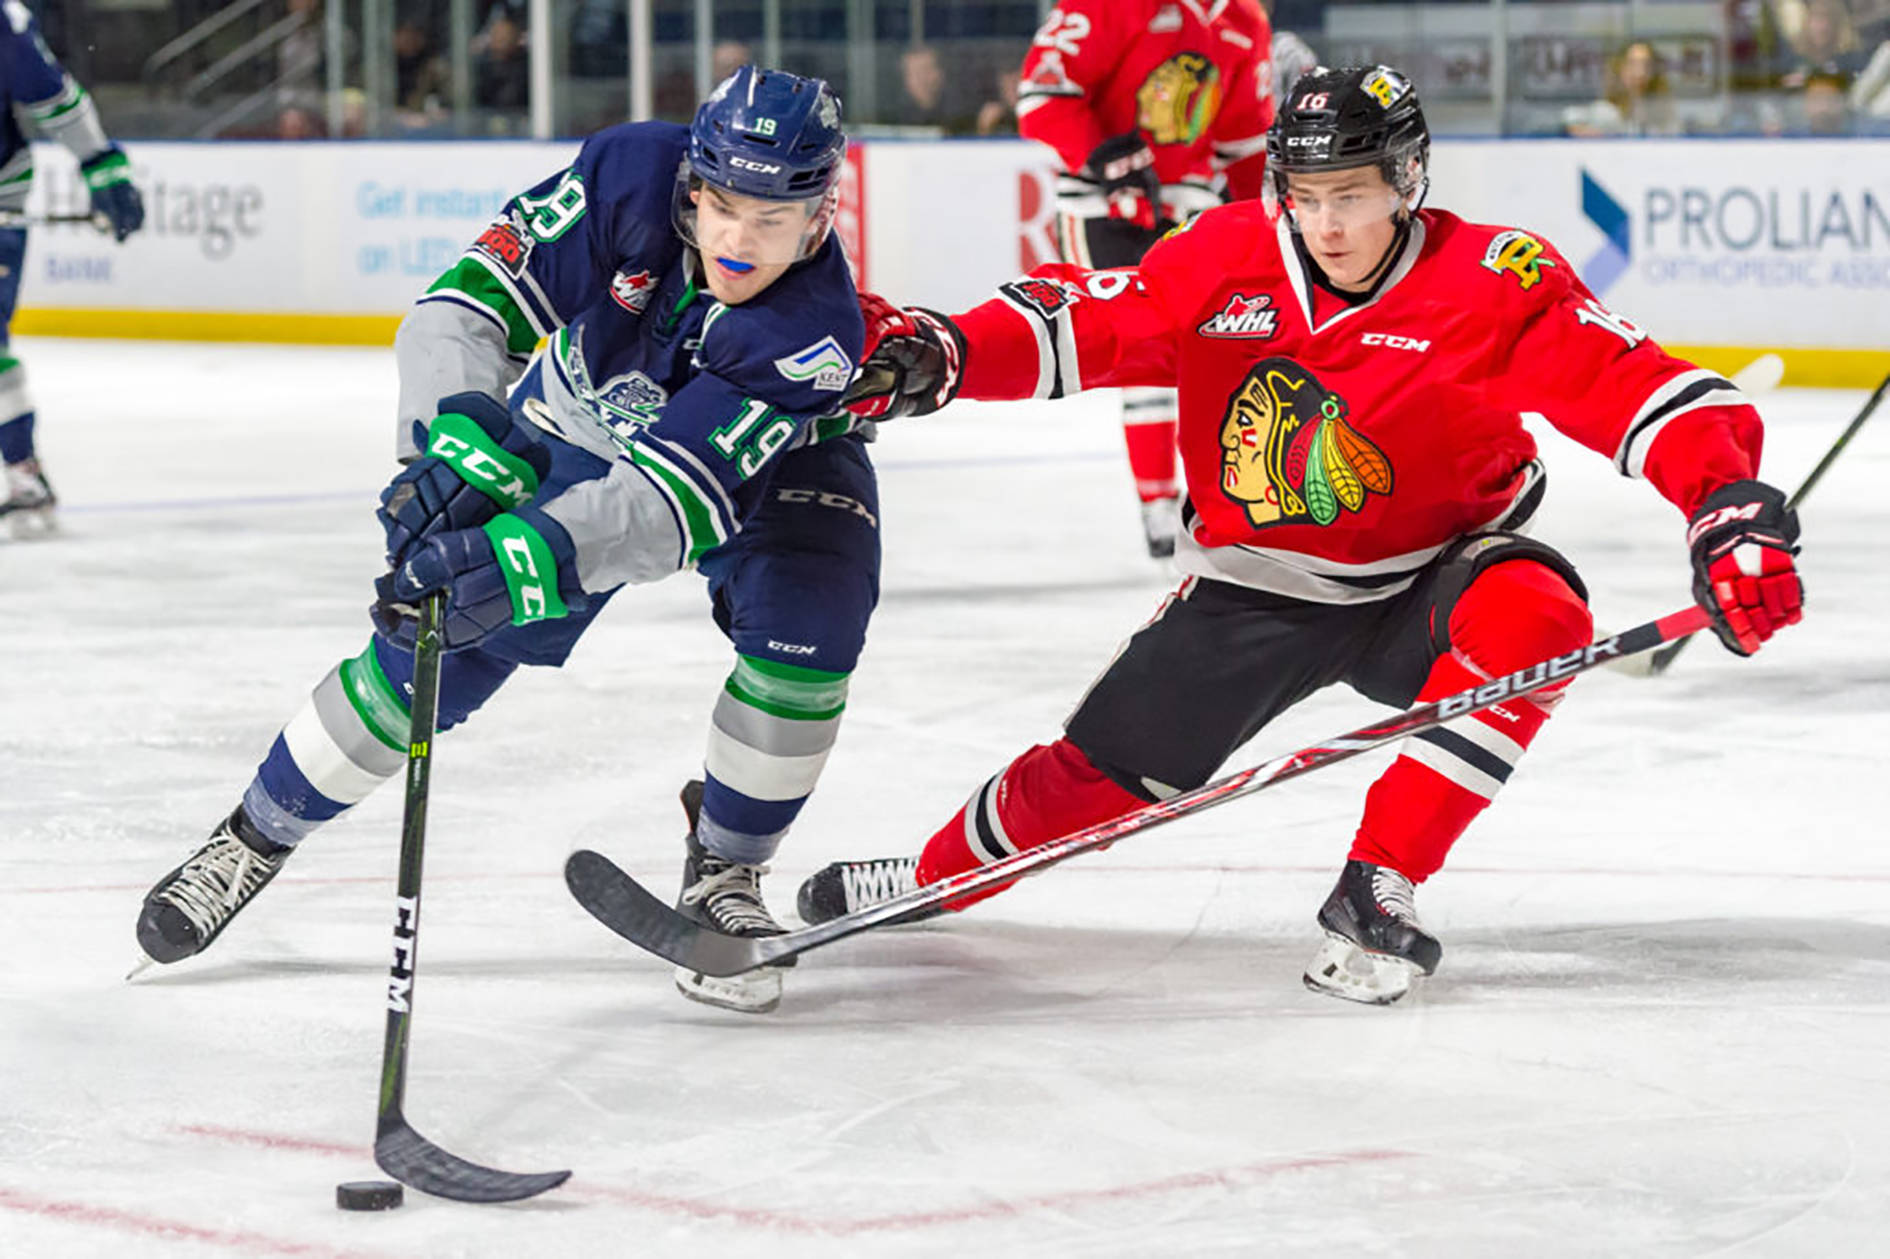 Thunderbirds center Donovan Neuls gathers the puck as the Winterhawks’ Henri Jokiharju defends during WHL play at the accesso ShoWare Center on Saturday night. COURTESY PHOTO, Brian Liesse, T-Birds